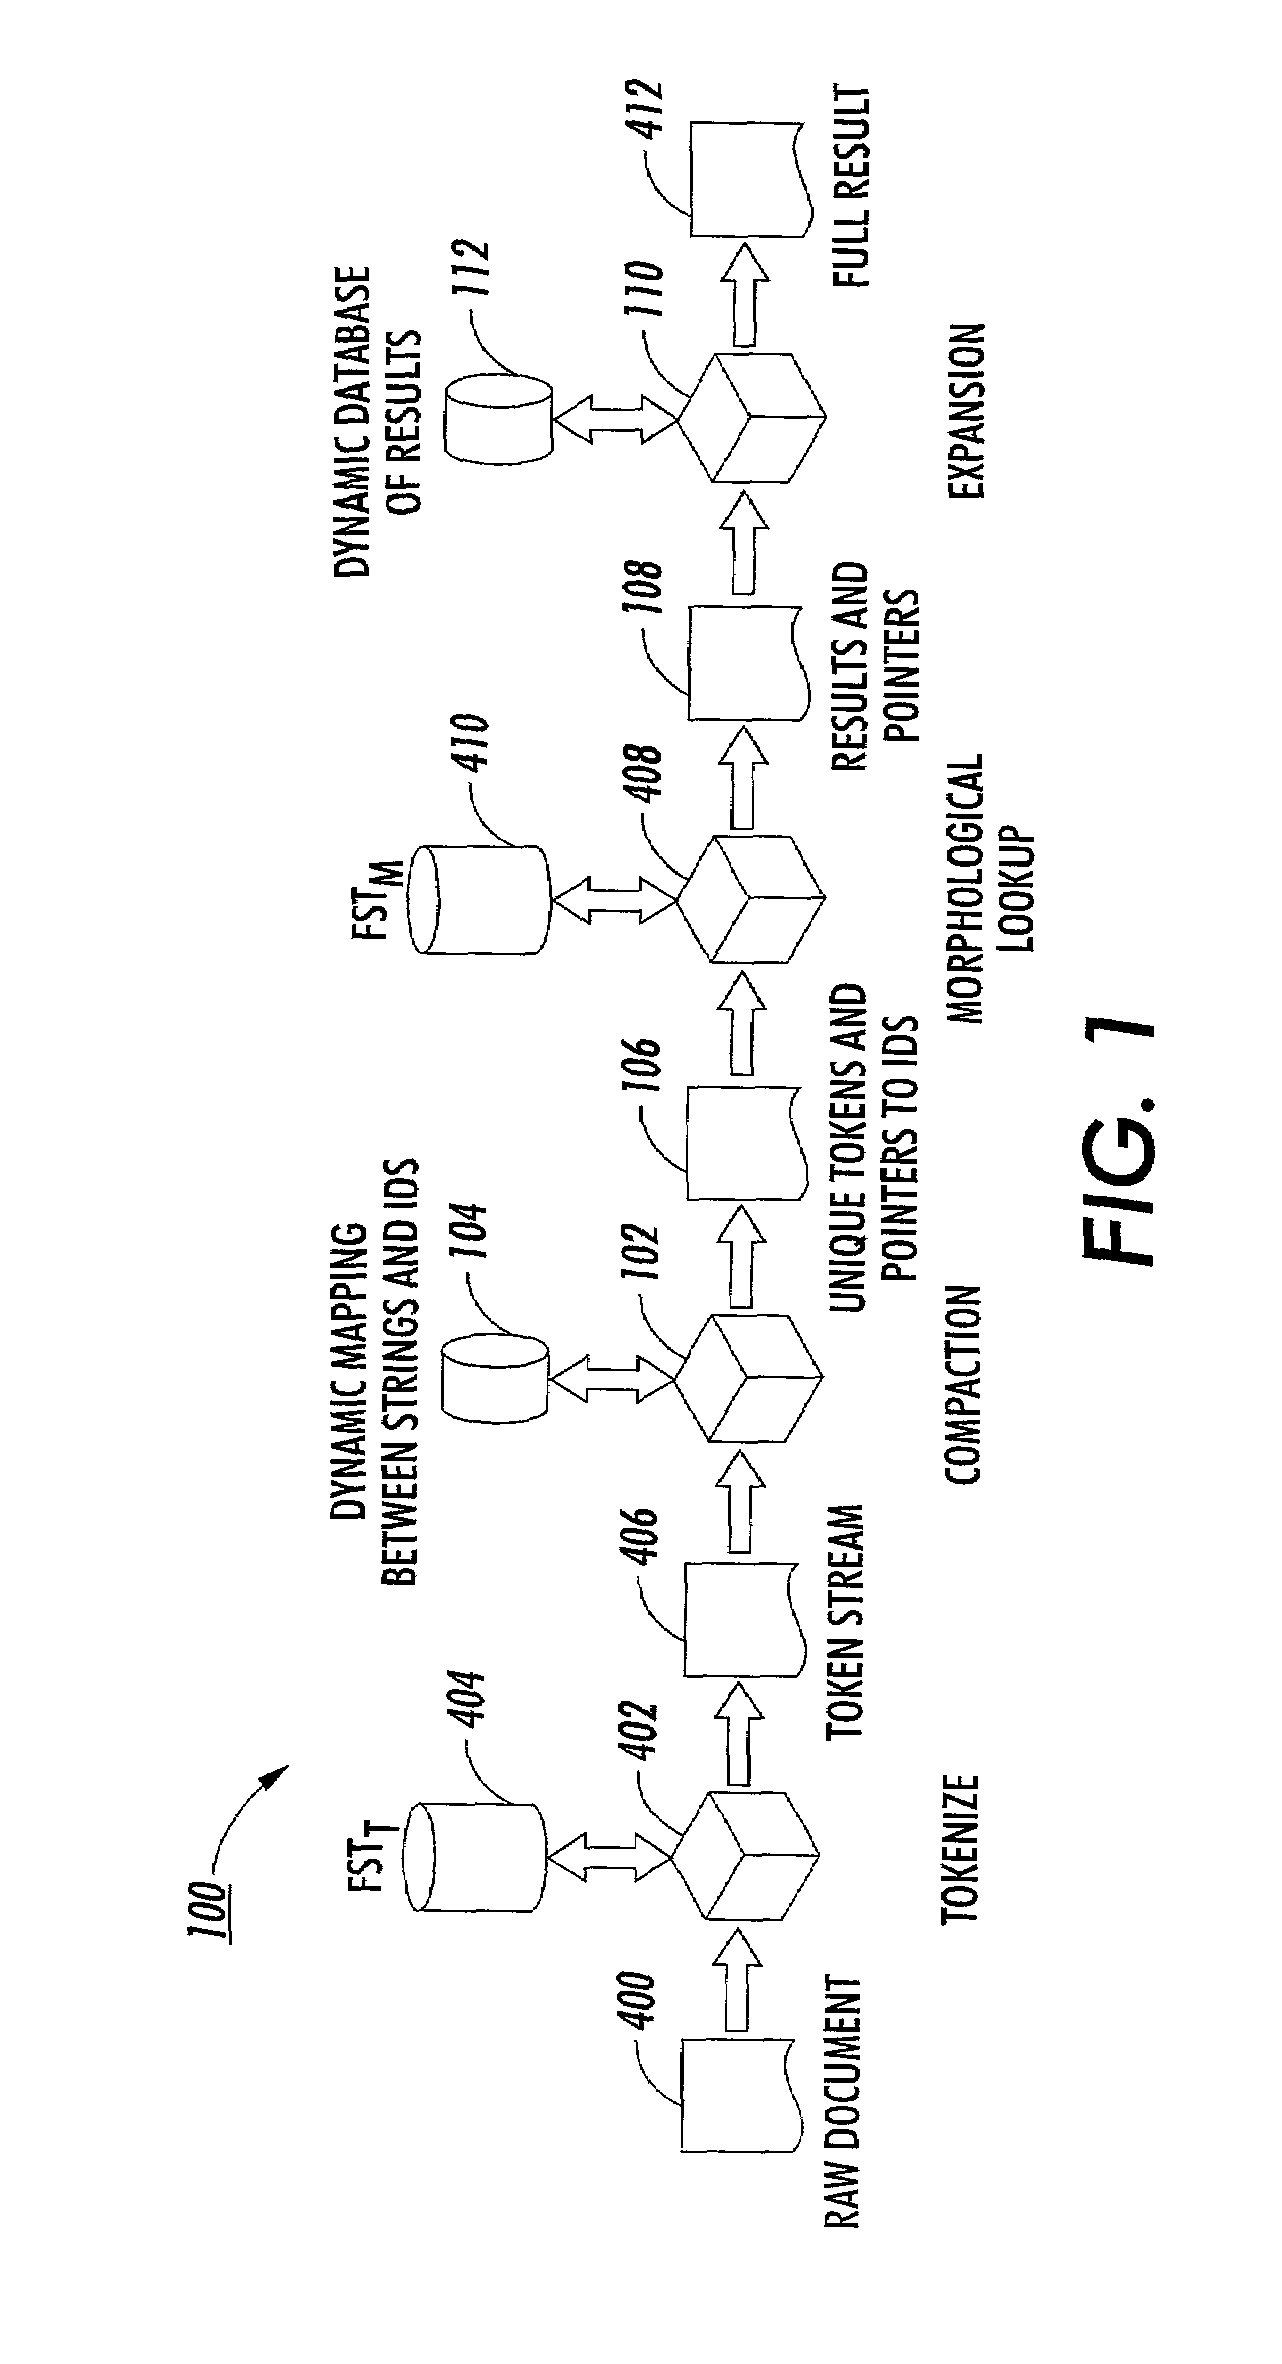 Method and system for accelerated morphological analysis